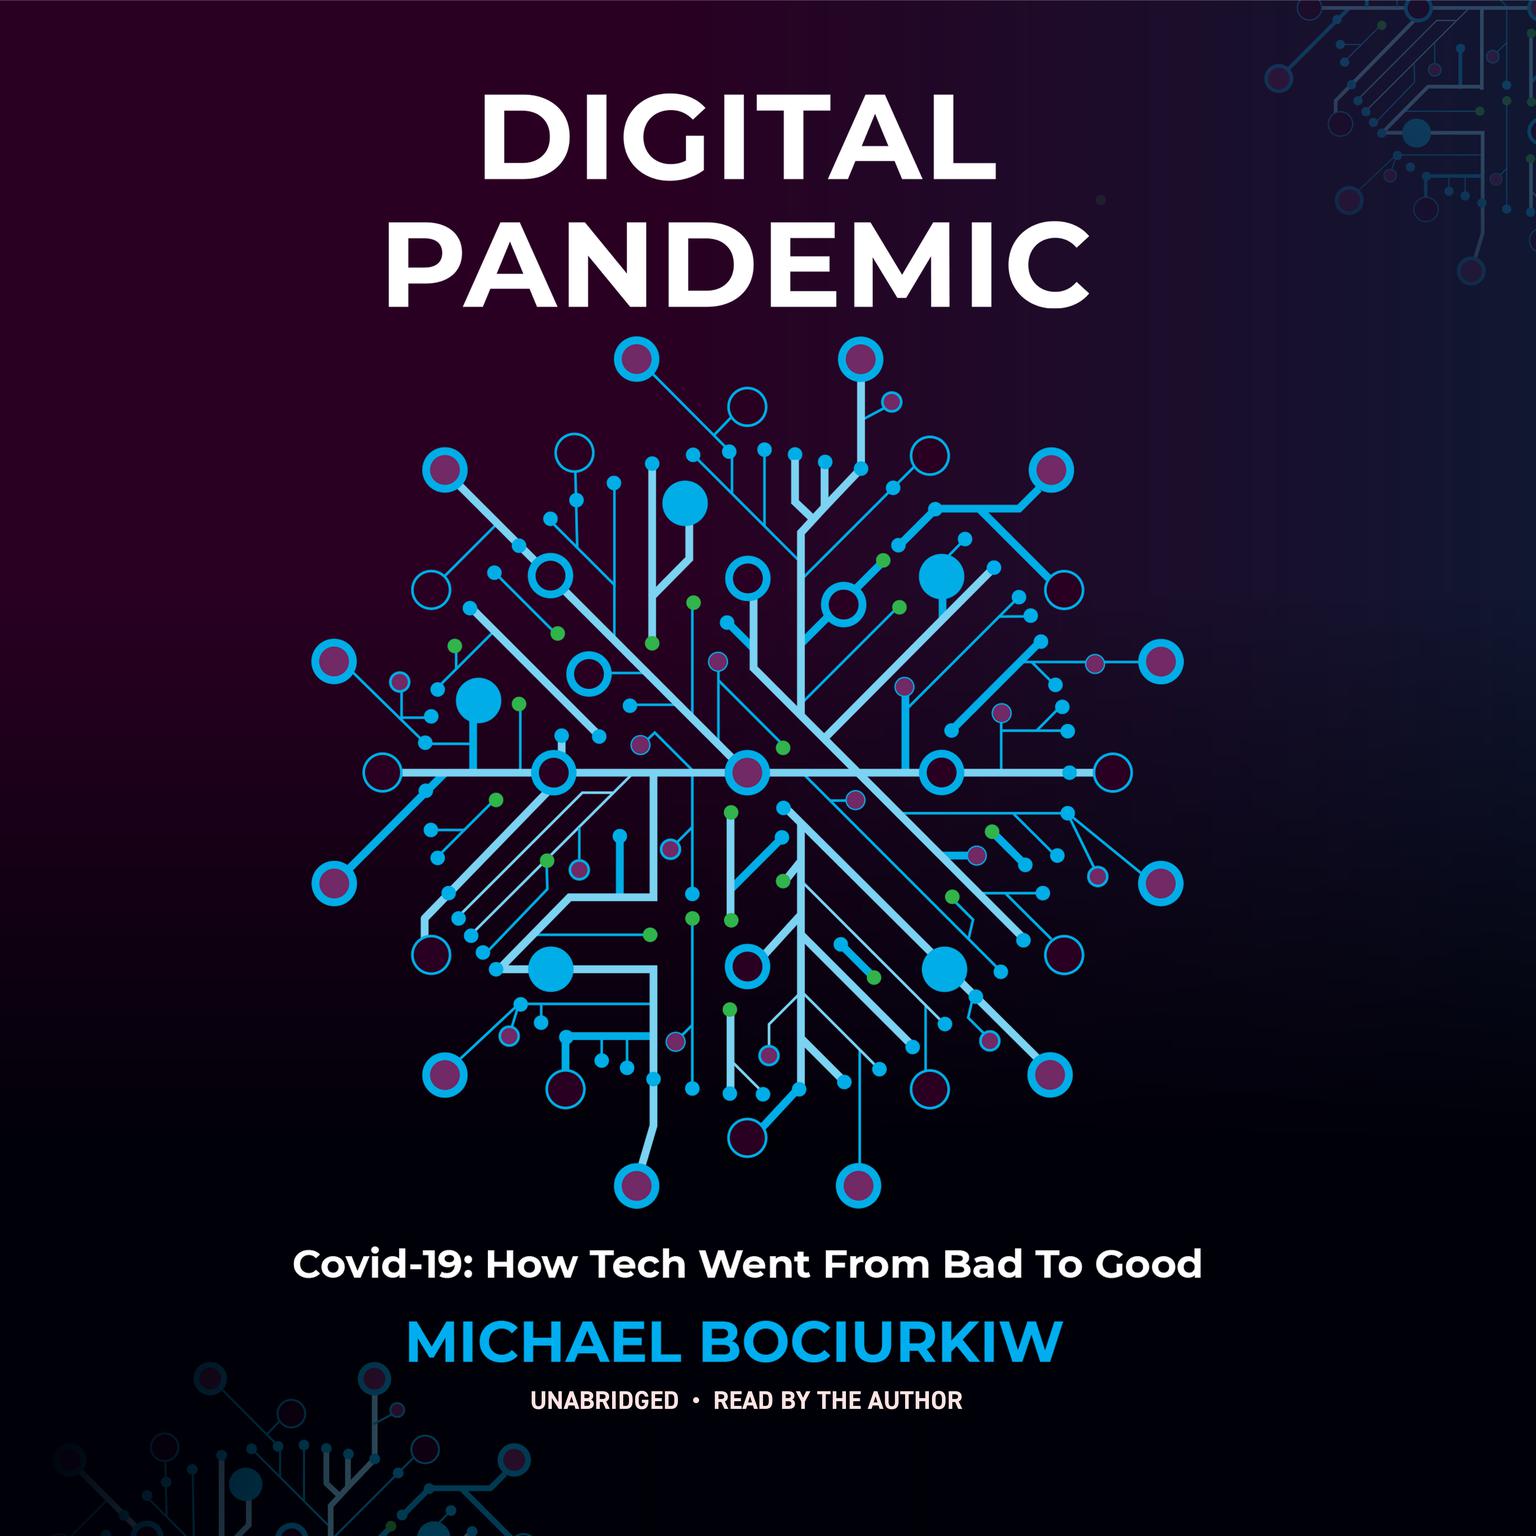 Digital Pandemic: Covid-19: How Tech Went from Bad to Good Audiobook, by Michael Bociurkiw